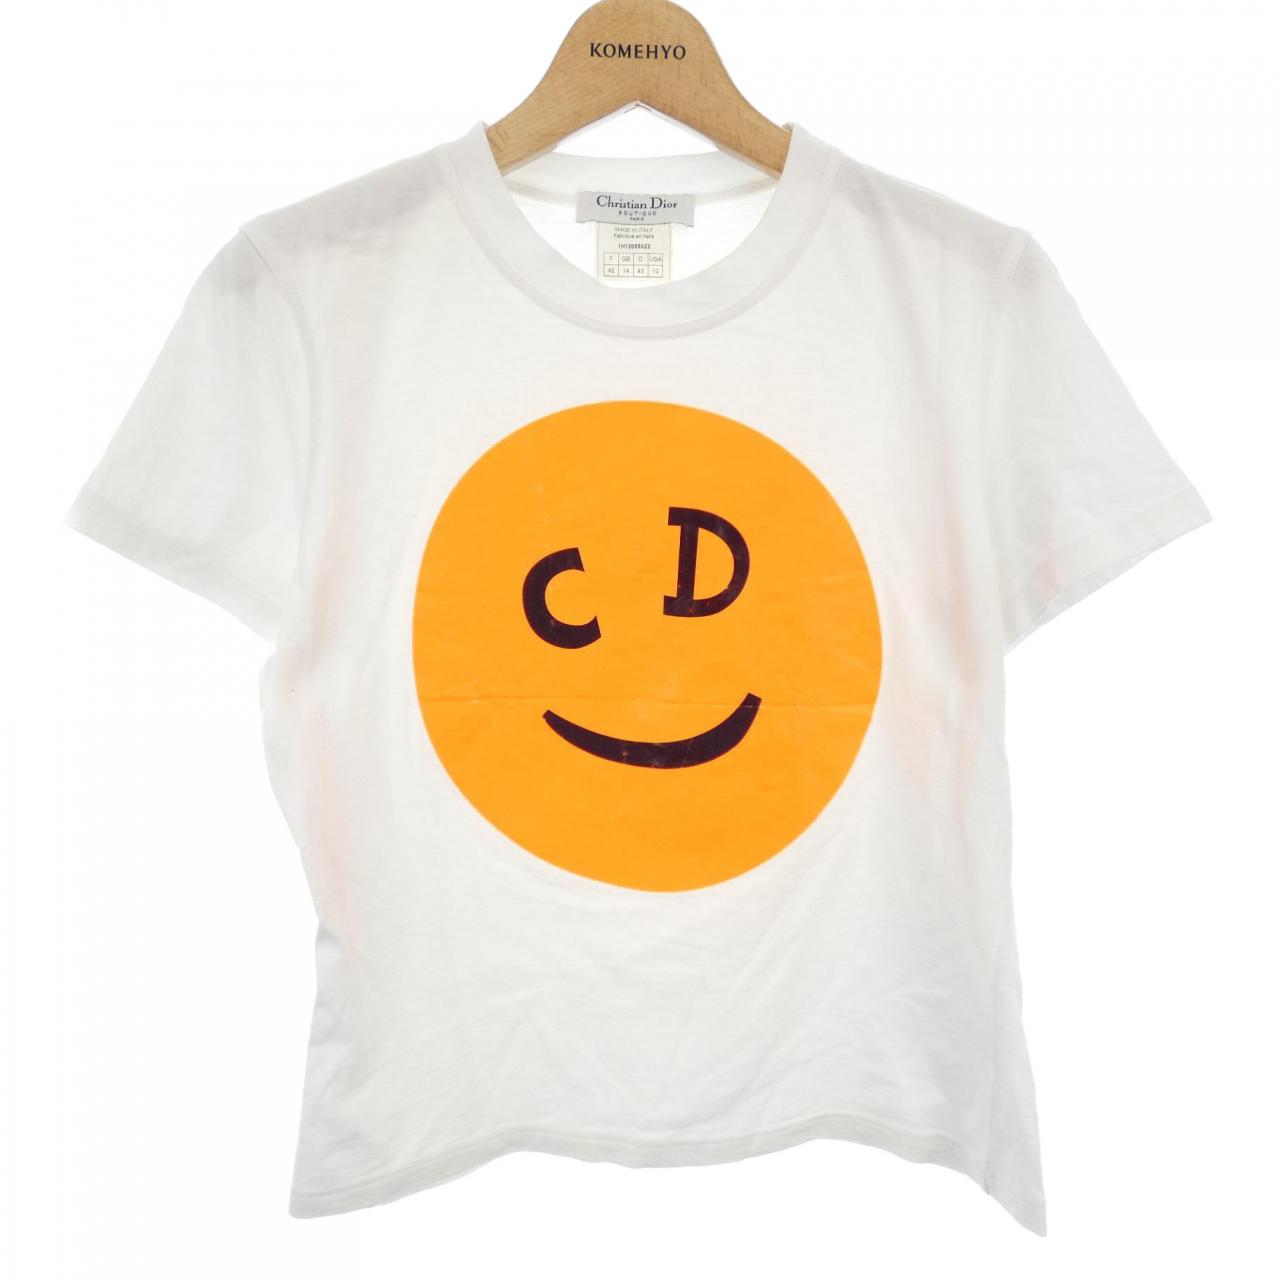 ＷＥＢ限定カラー有 Christian Dior ＊ Tシャツ made in Italy - T